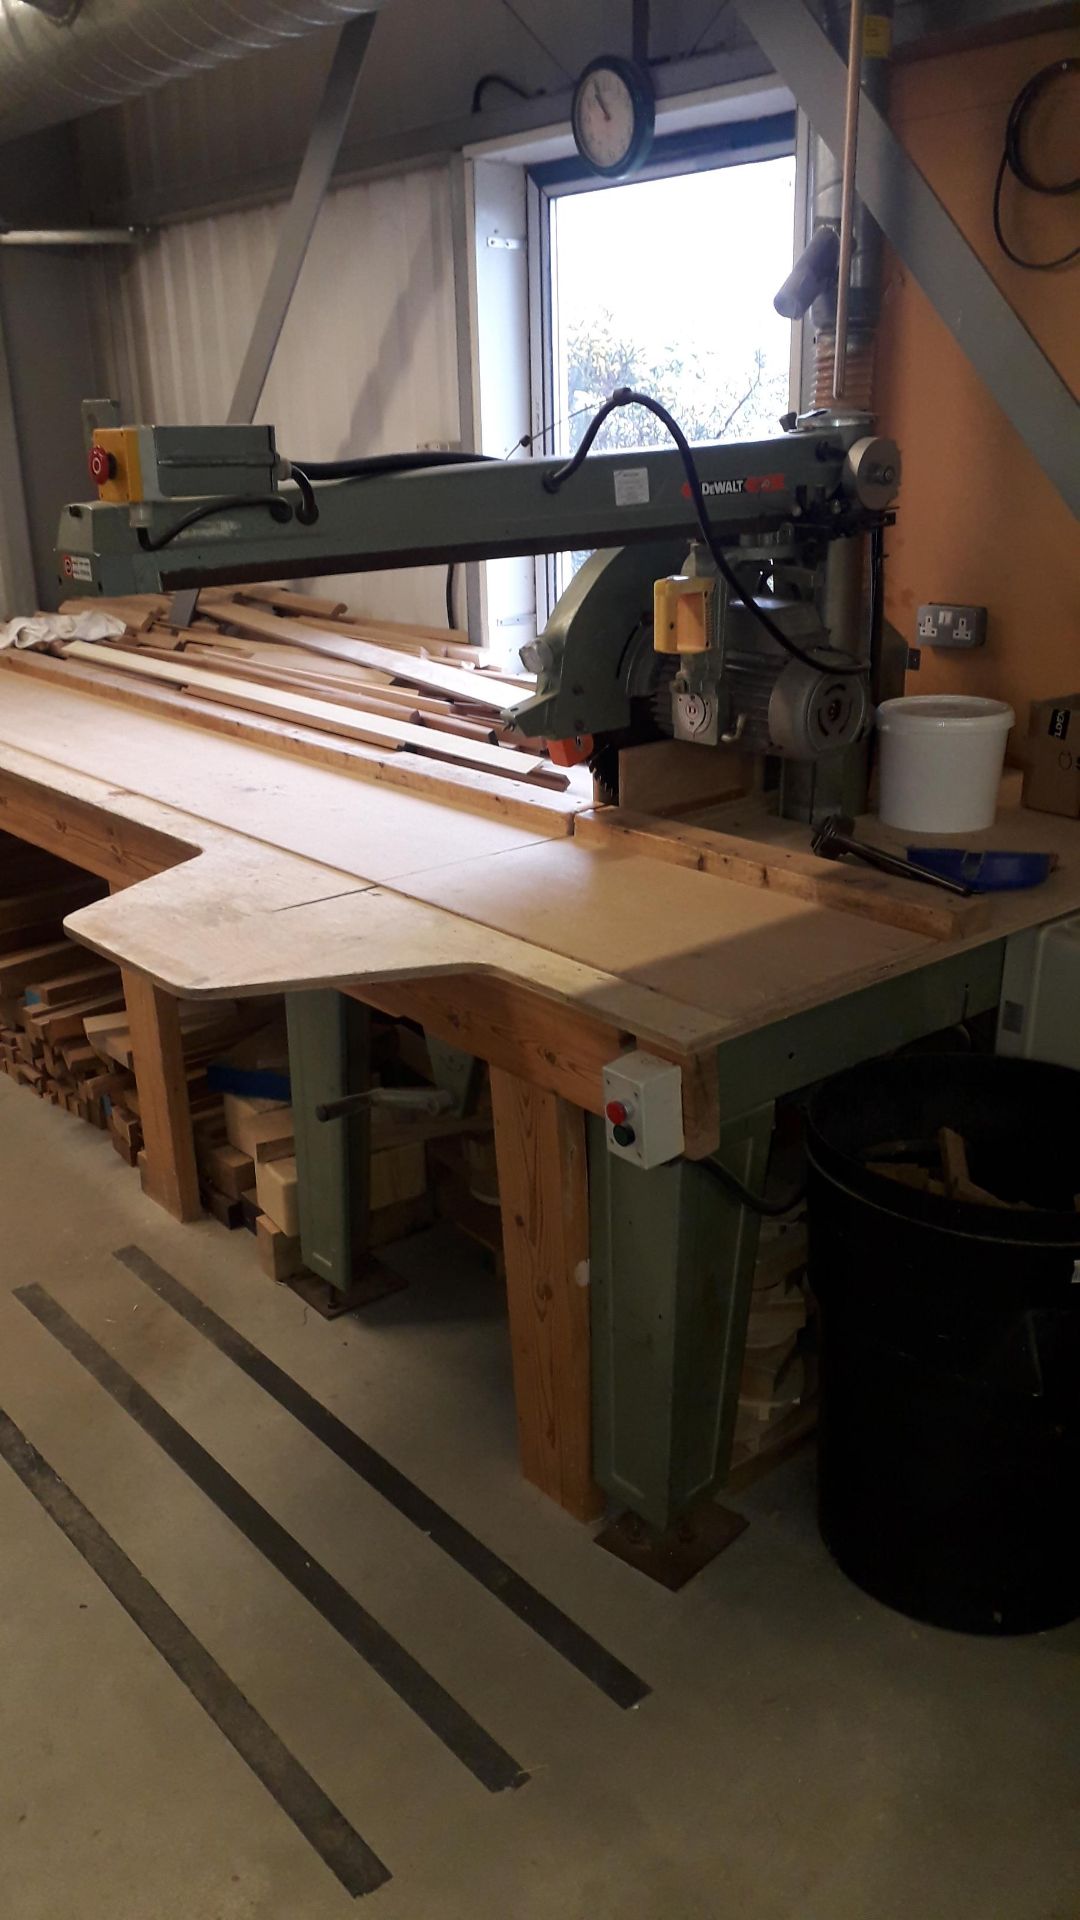 Dewalt 1635/6L Radial Arm Saw and Timber Constructed Work Bench (Timber stock excluded) – To Be - Image 2 of 6